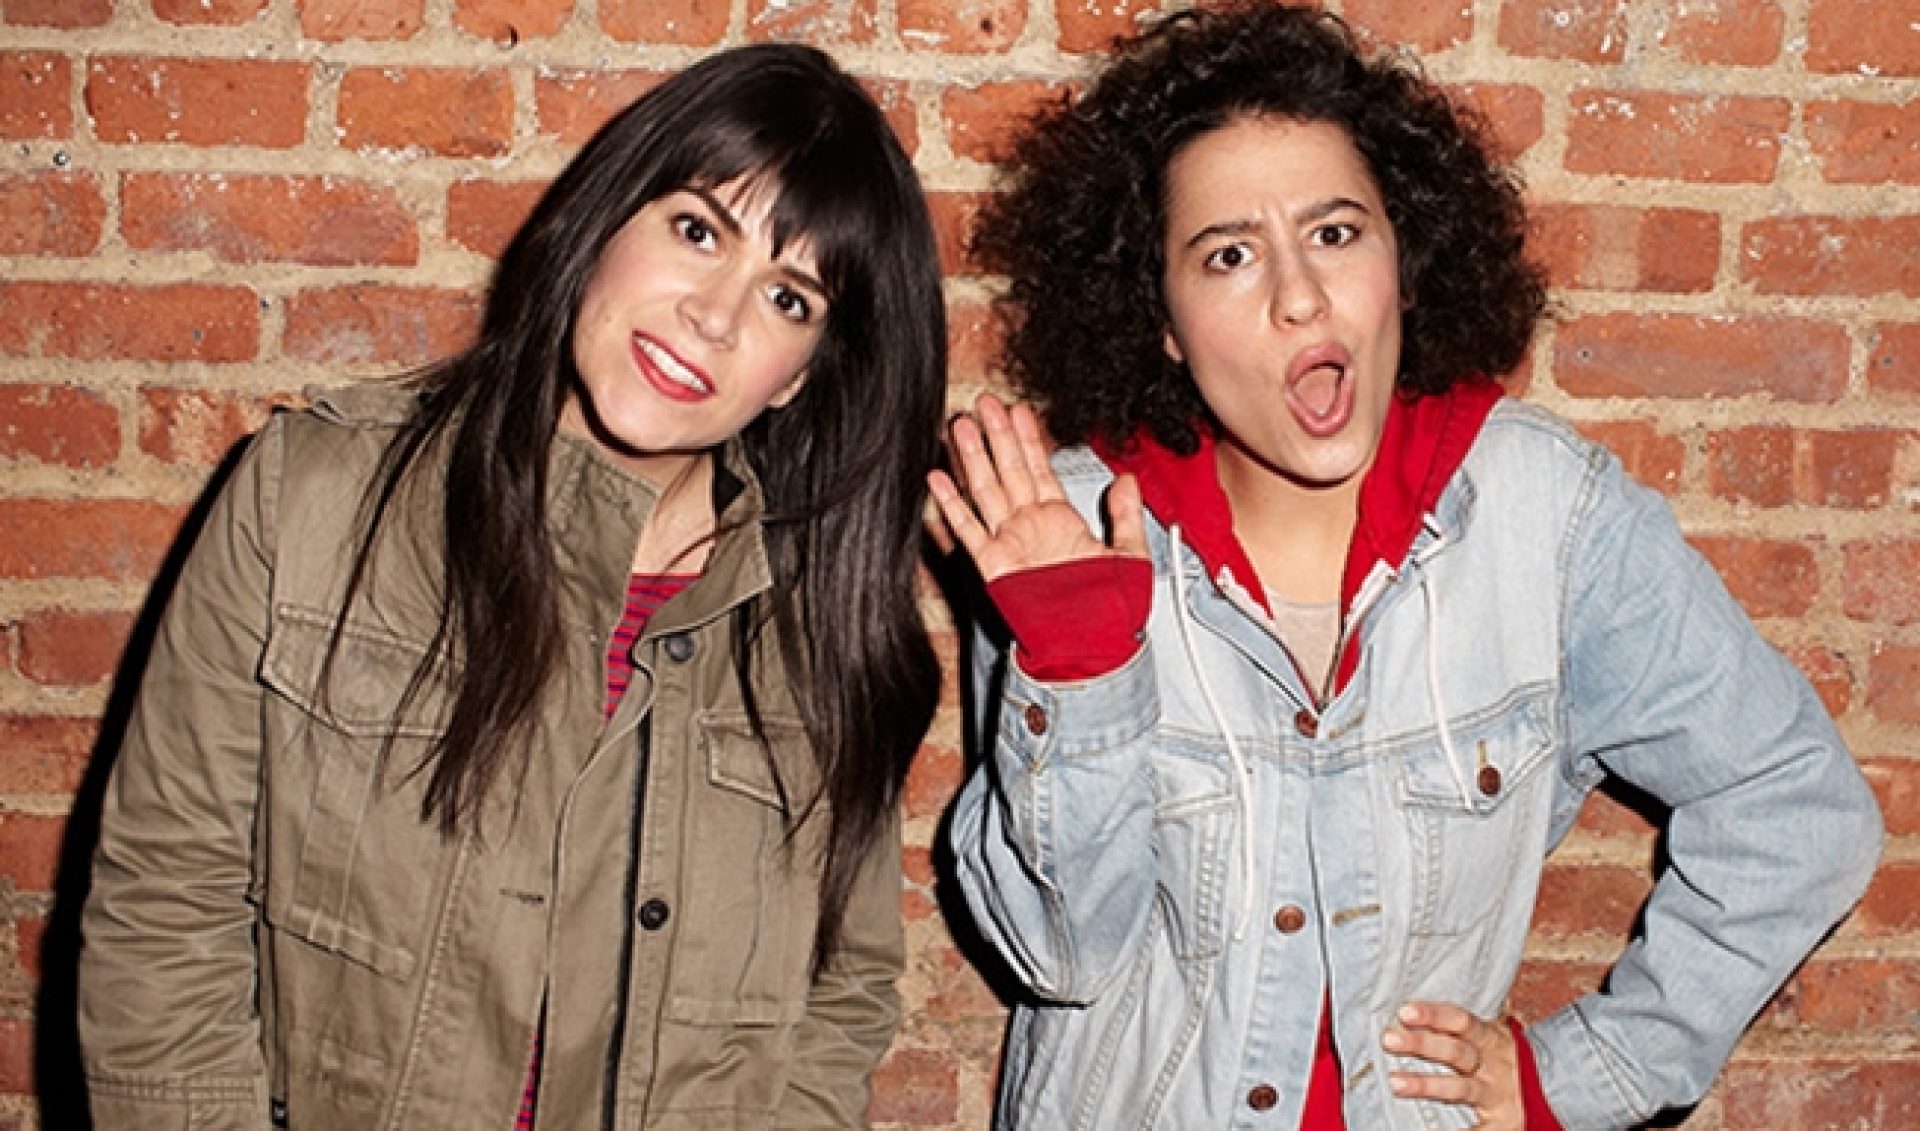 ‘Broad City’ Gets Picked Up For A Second Season On Comedy Central